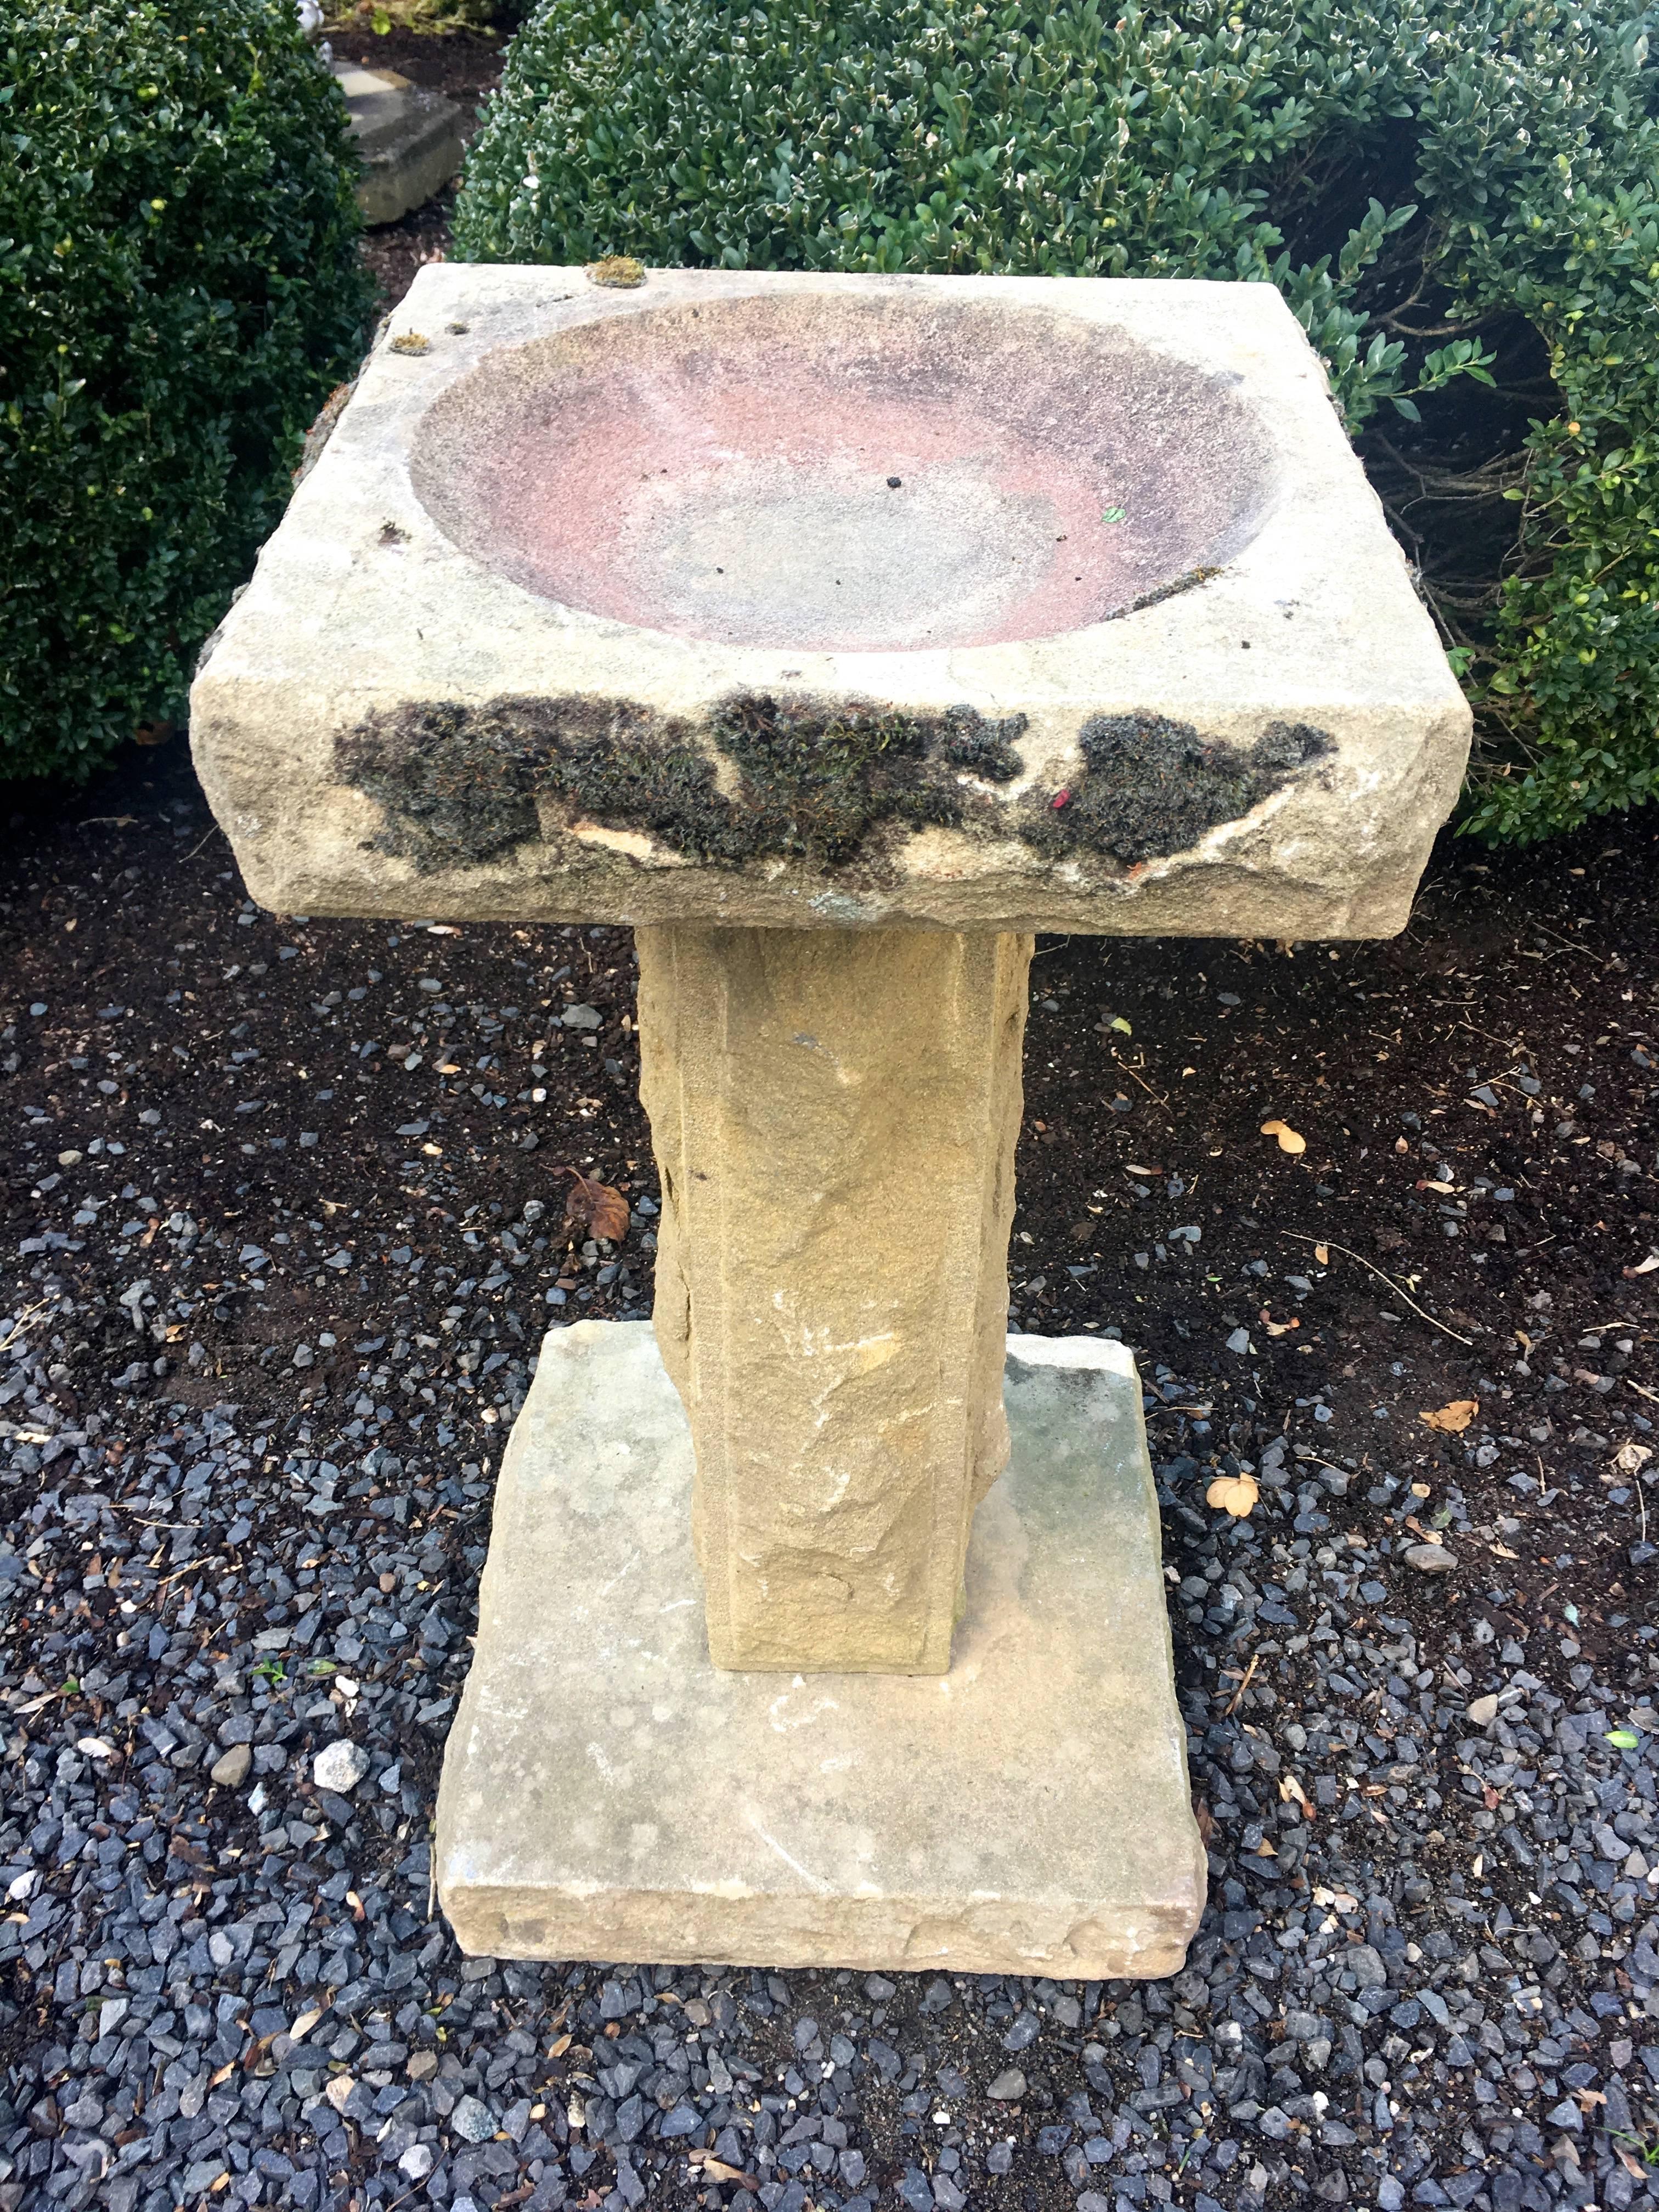 This elegant Edwardian birdbath in three parts is hand-carved and beautifully weathered with some mossing. In excellent antique condition, except for one area on the base that has some flaking (see last photo), it would be the ideal accent piece in